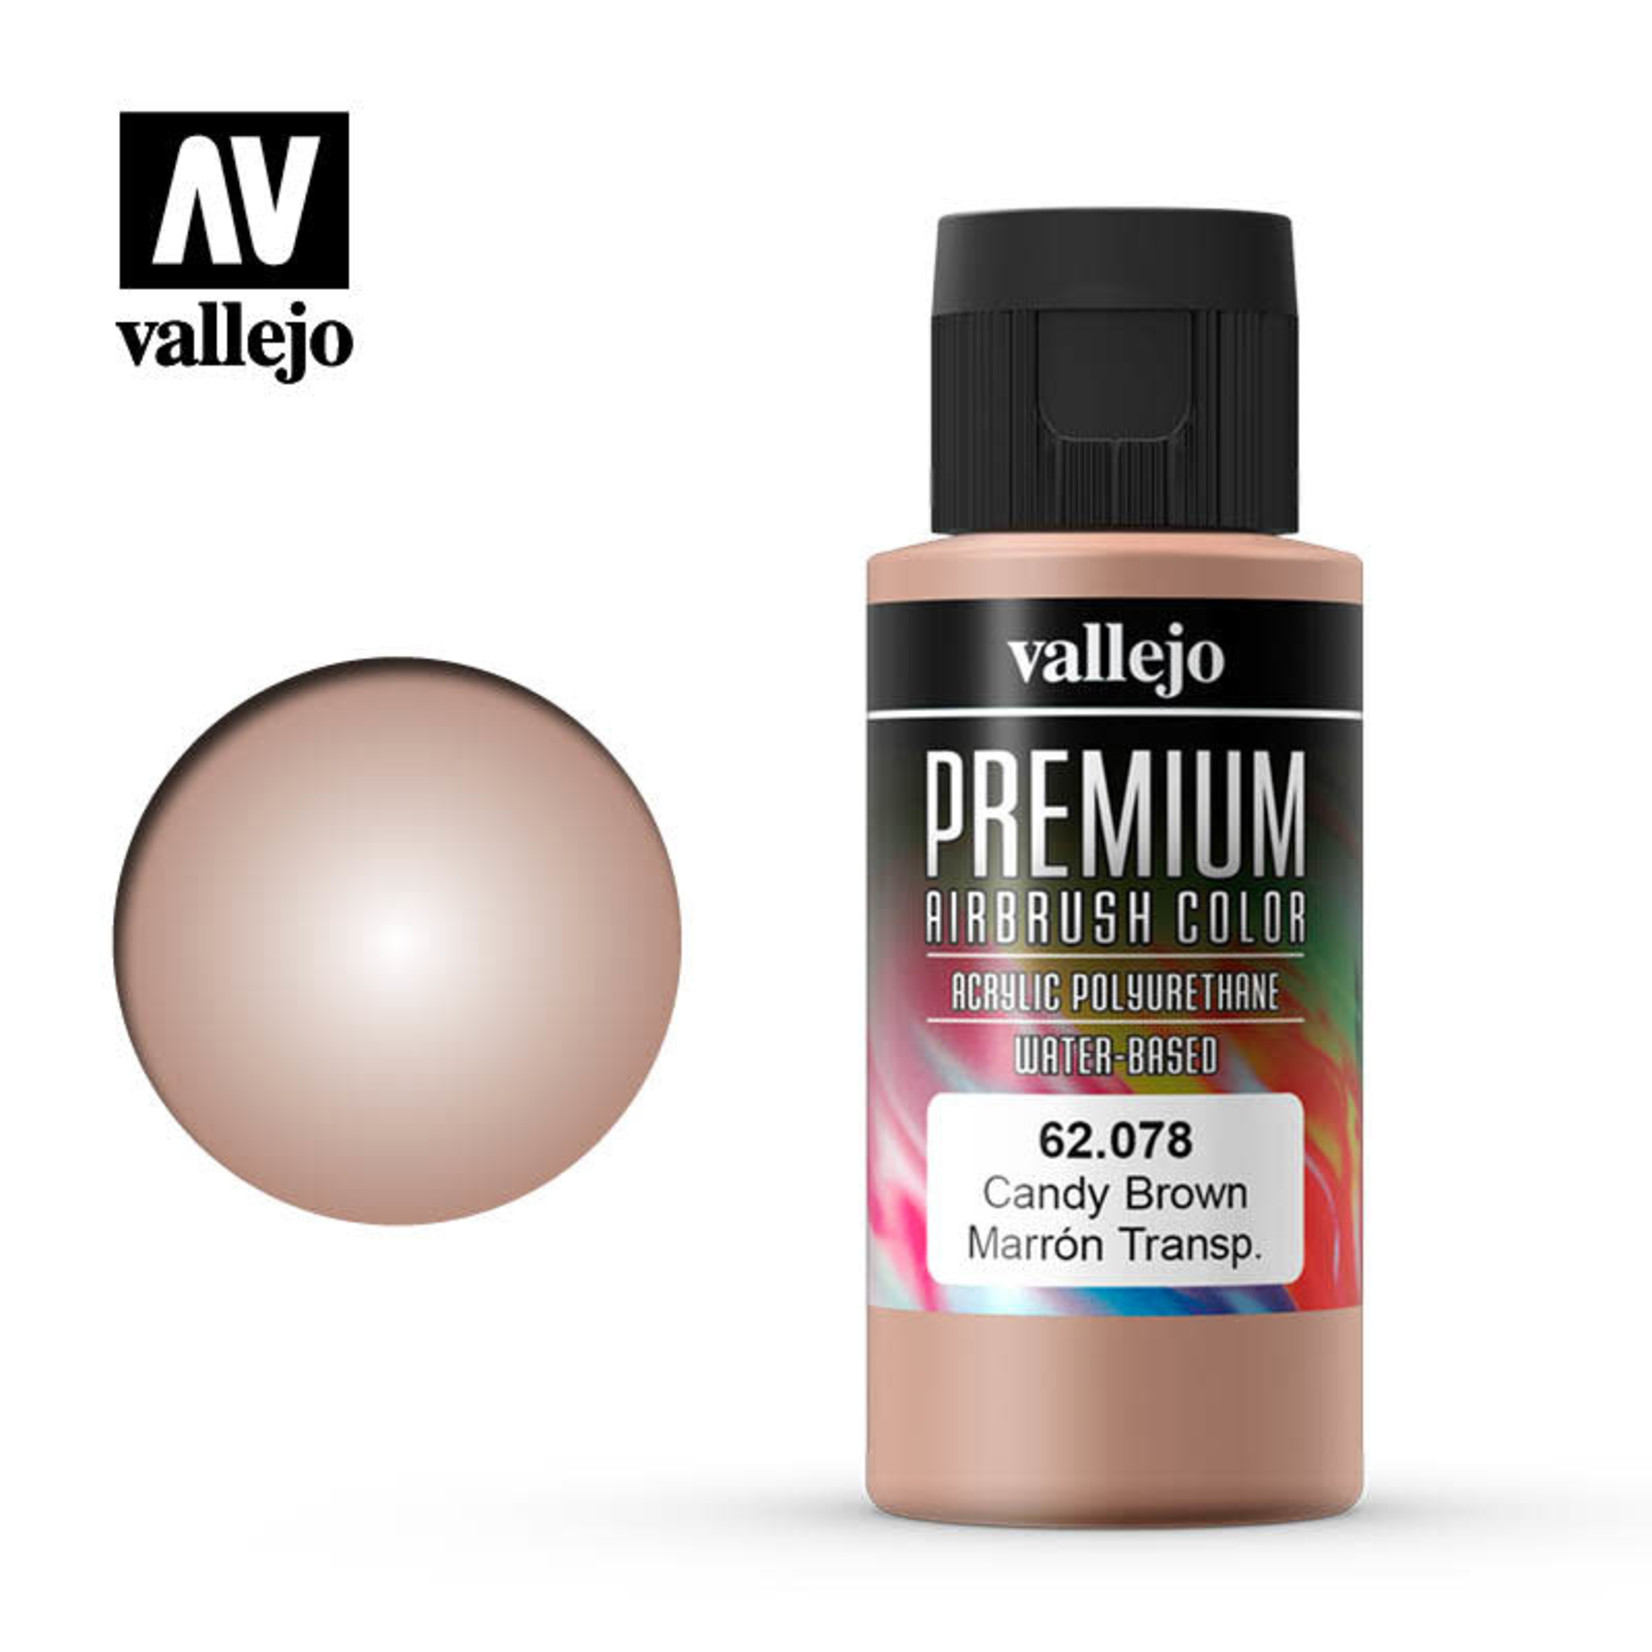 Vallejo VAL62078 Premium Airbrush Color Candy Brown (60ml)